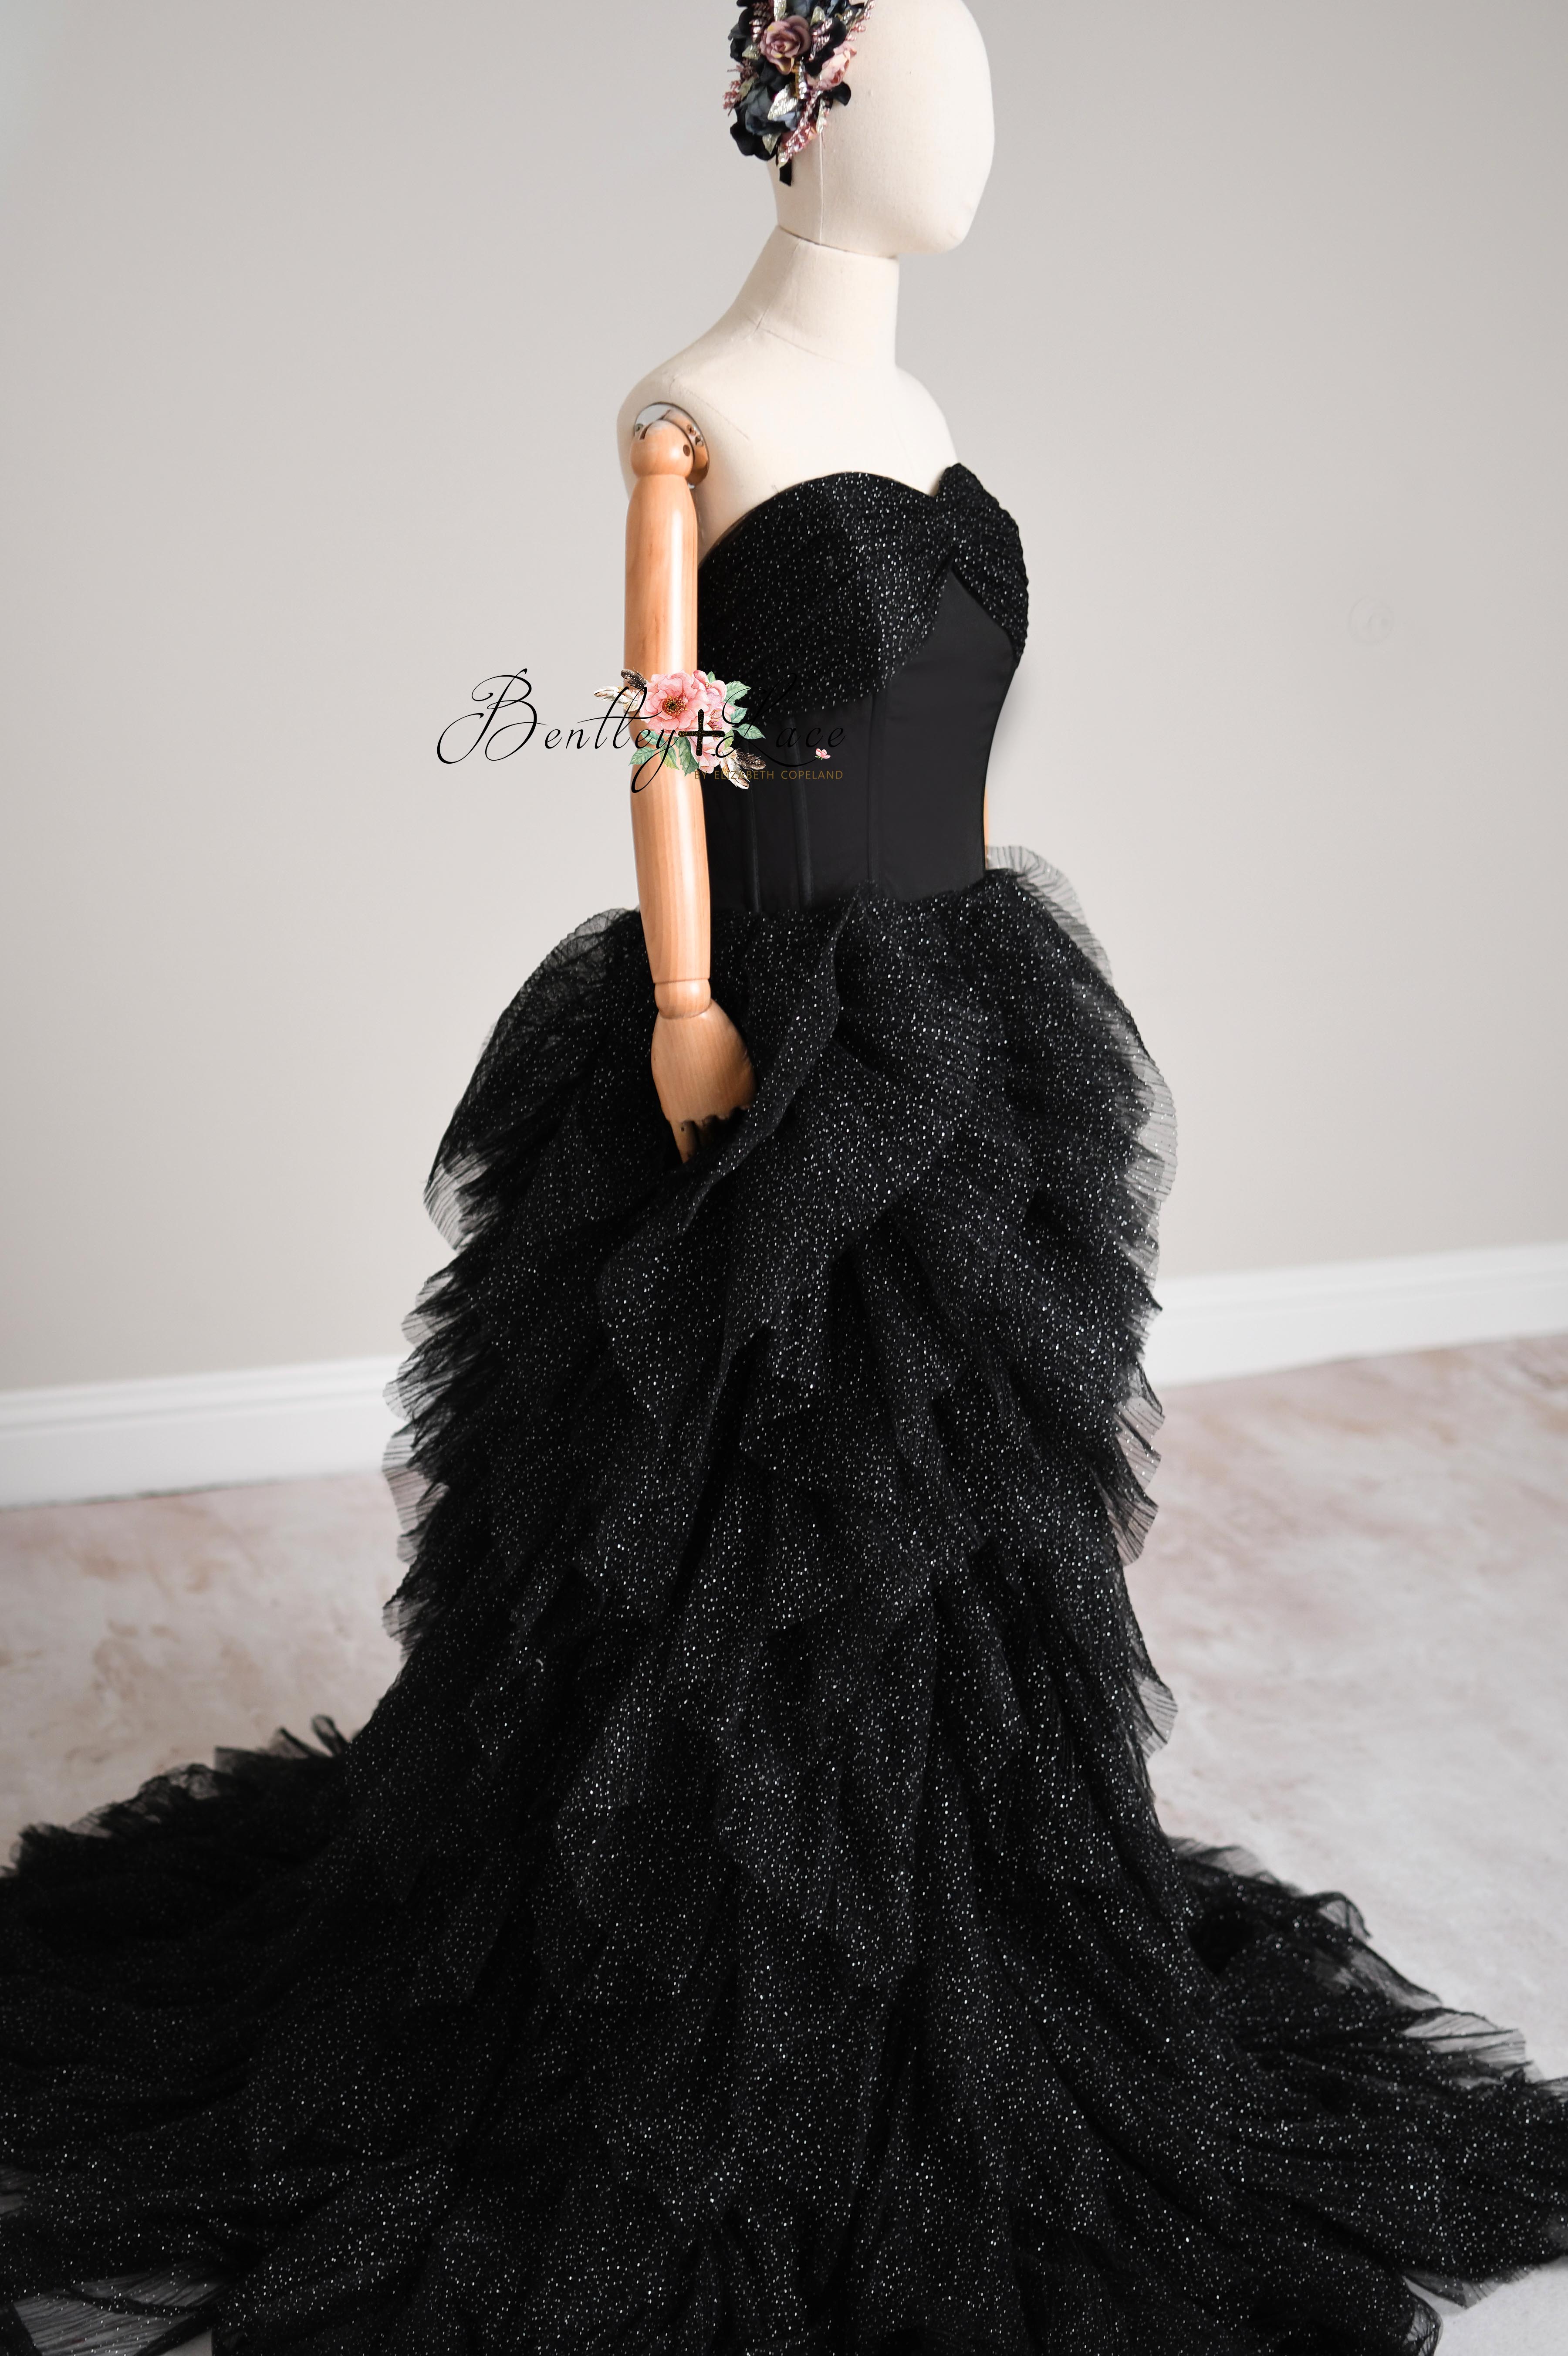 "Elegant Black Dress for Teens and Adults""Teen to Adult Black Sequin Floor-Length Dress"